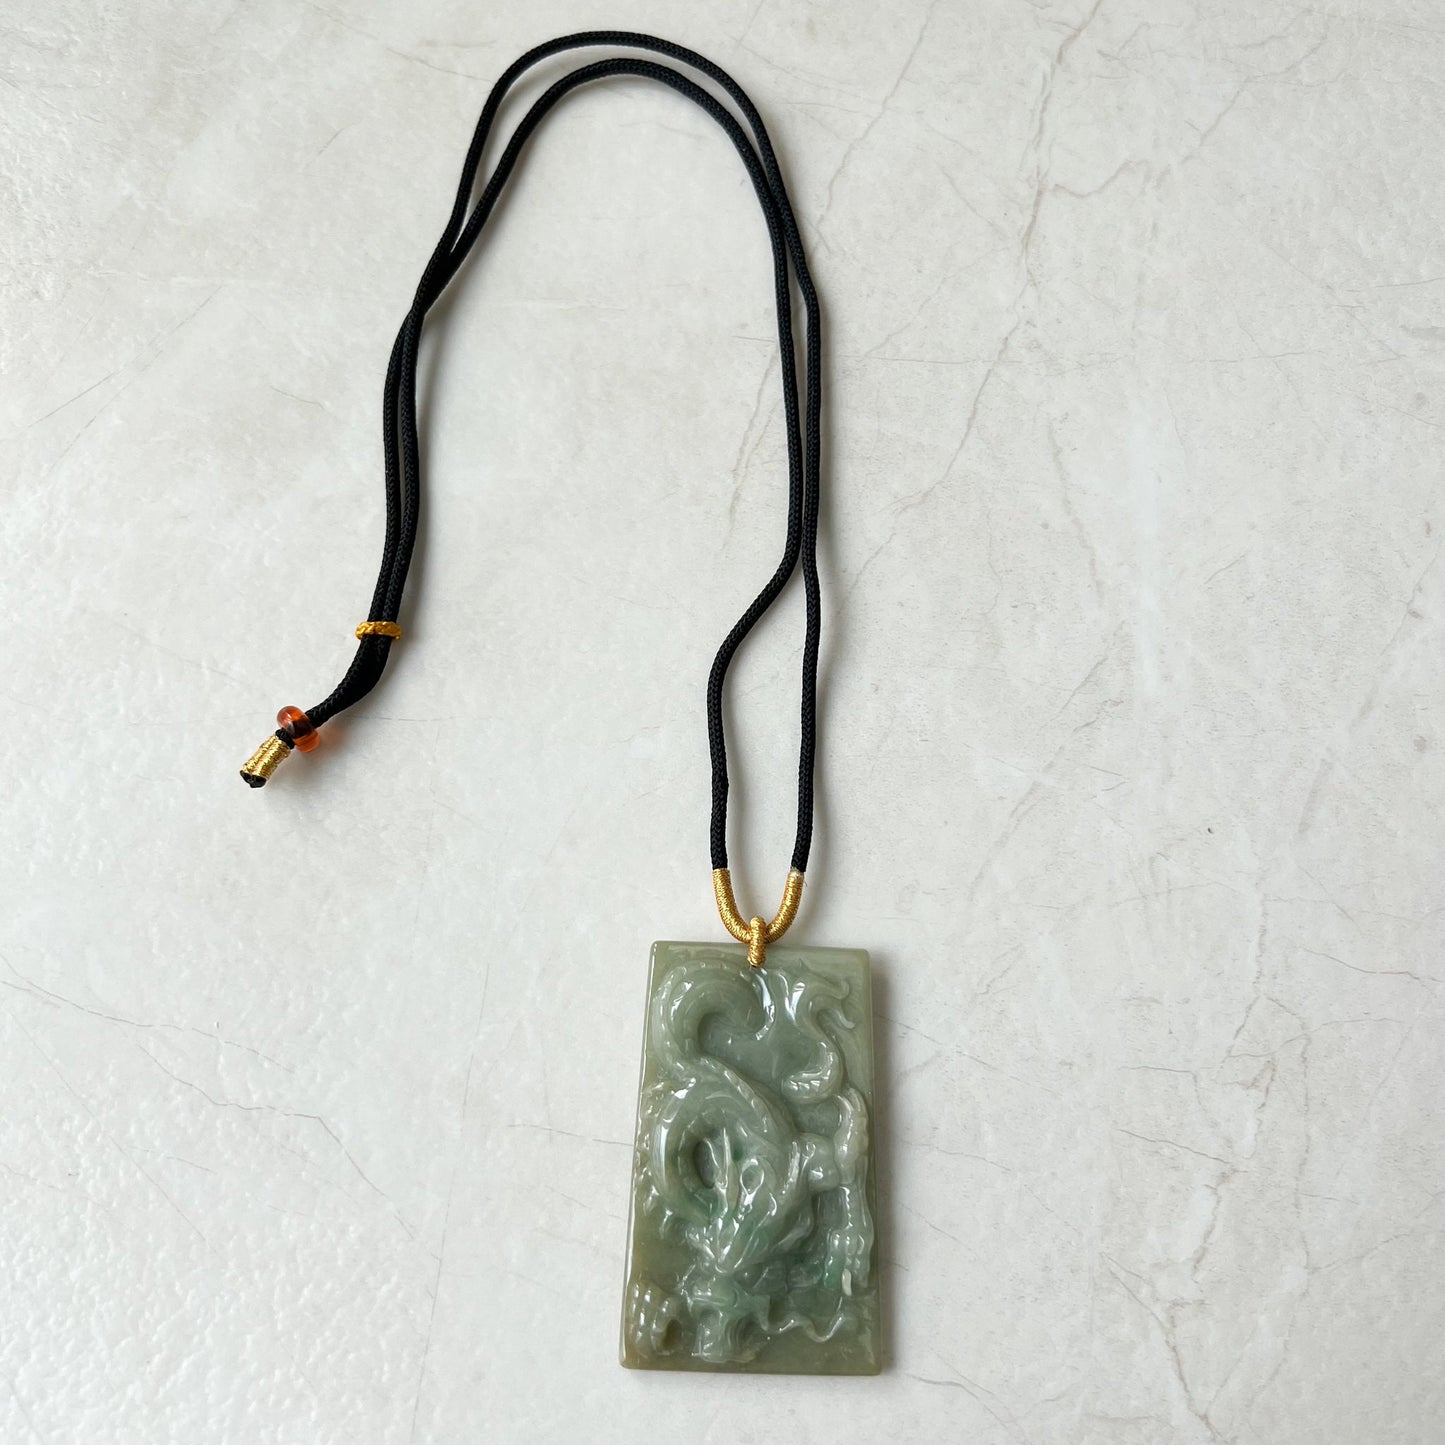 Jadeite Jade Dragon Chinese Zodiac Hand Carved Pendant Necklace, YJ-0321-0319300 - AriaDesignCollection